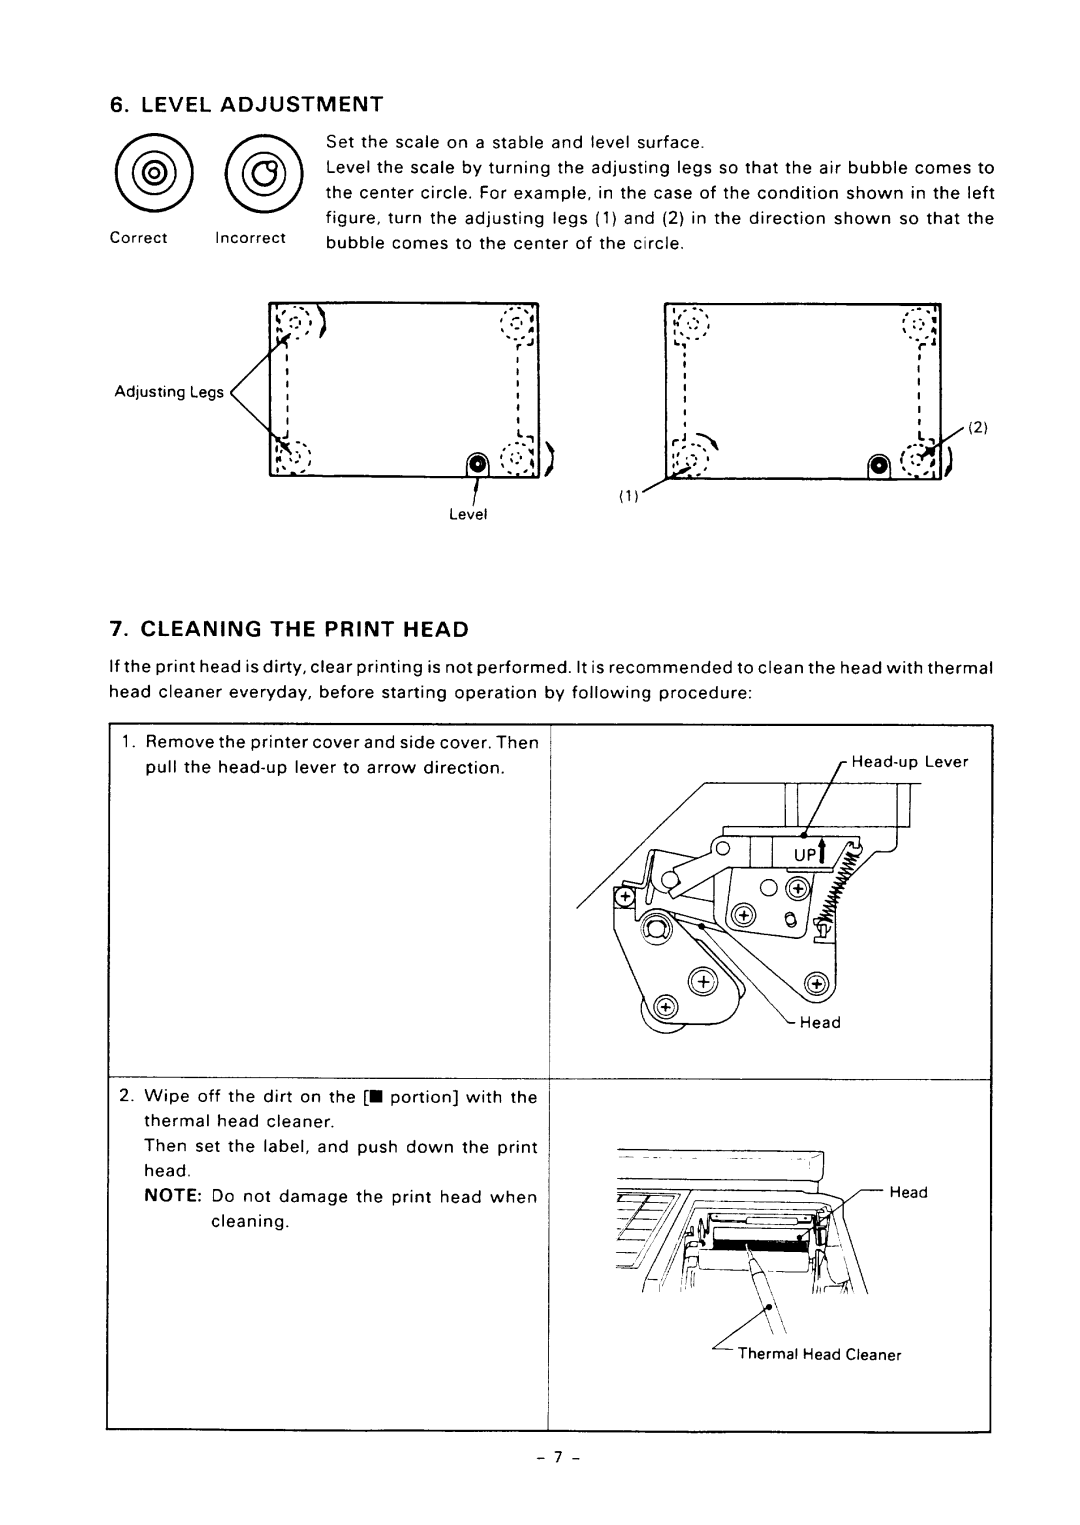 Toshiba SL57 SERIES owner manual Level @@, Adjustment, Print Head, Cleaning 